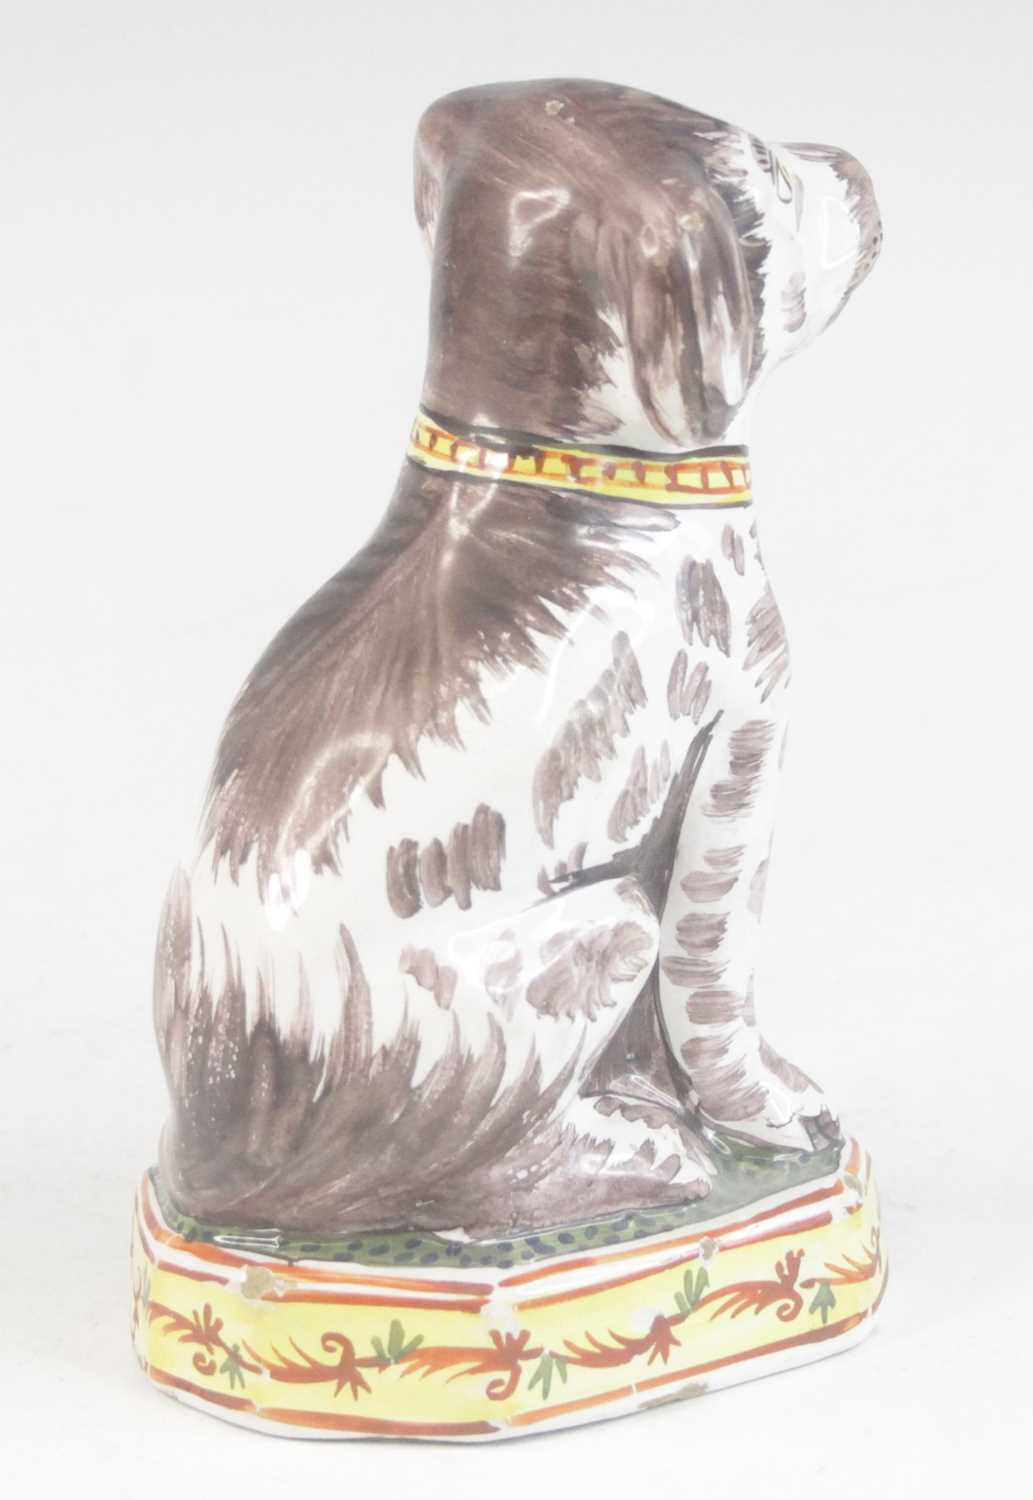 A Delft or Faience polychrome model of a dog, shown seated upon a canted plinth, PAK monogram to the - Image 4 of 5